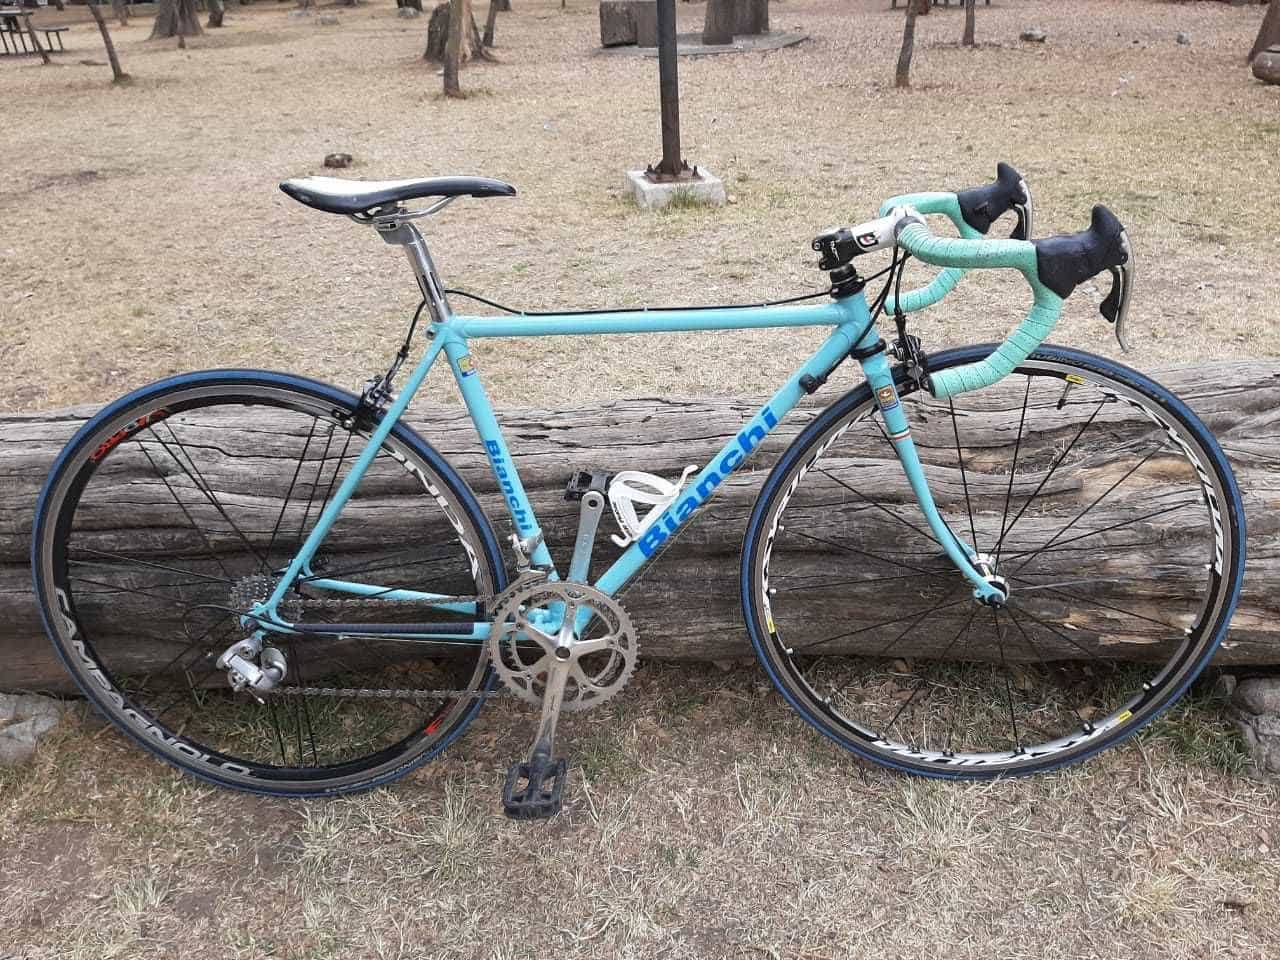 bianchi serial number lookup